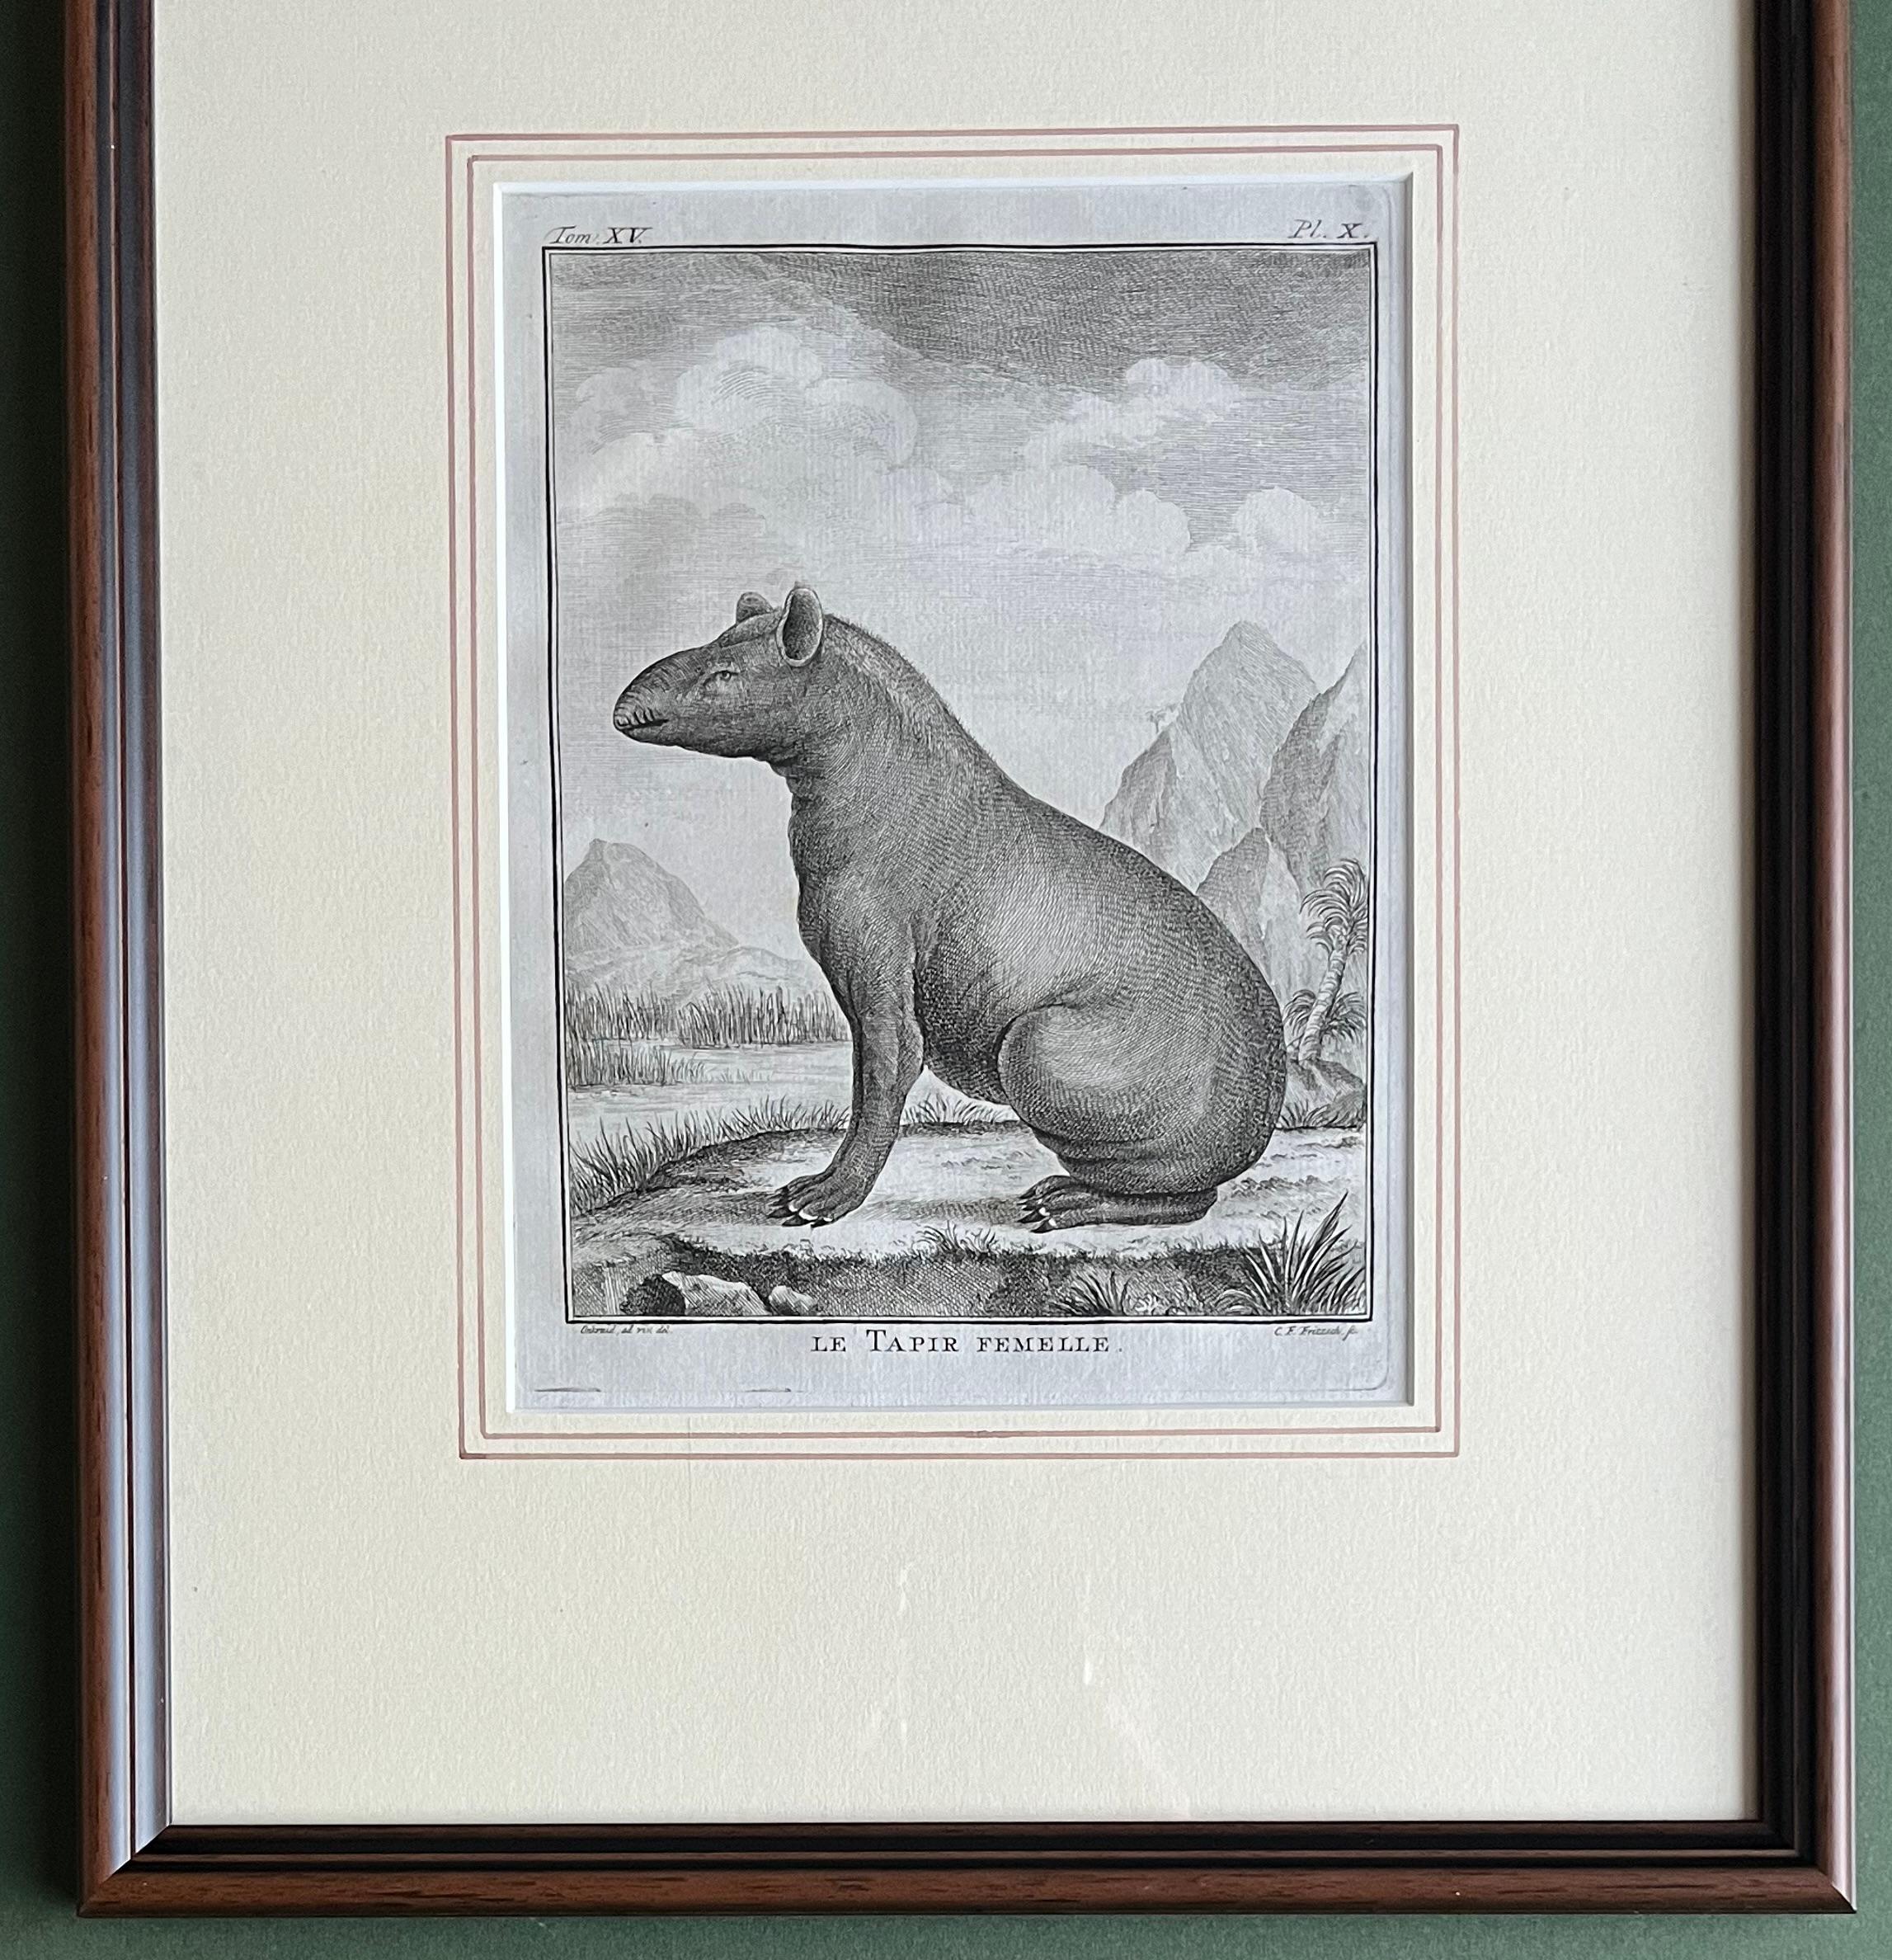 A very attractive pair of engravings of Male and Female Tapirs.

Etching / engraving on hand laid paper.
Sheet size:(7,9 x 10,2 inch). 
Image size:  (6,3 x 7,9 inch).
Framed size: 15 x 12½ inches

From a Dutch edition of ‘Histoire naturelle … ‘, by